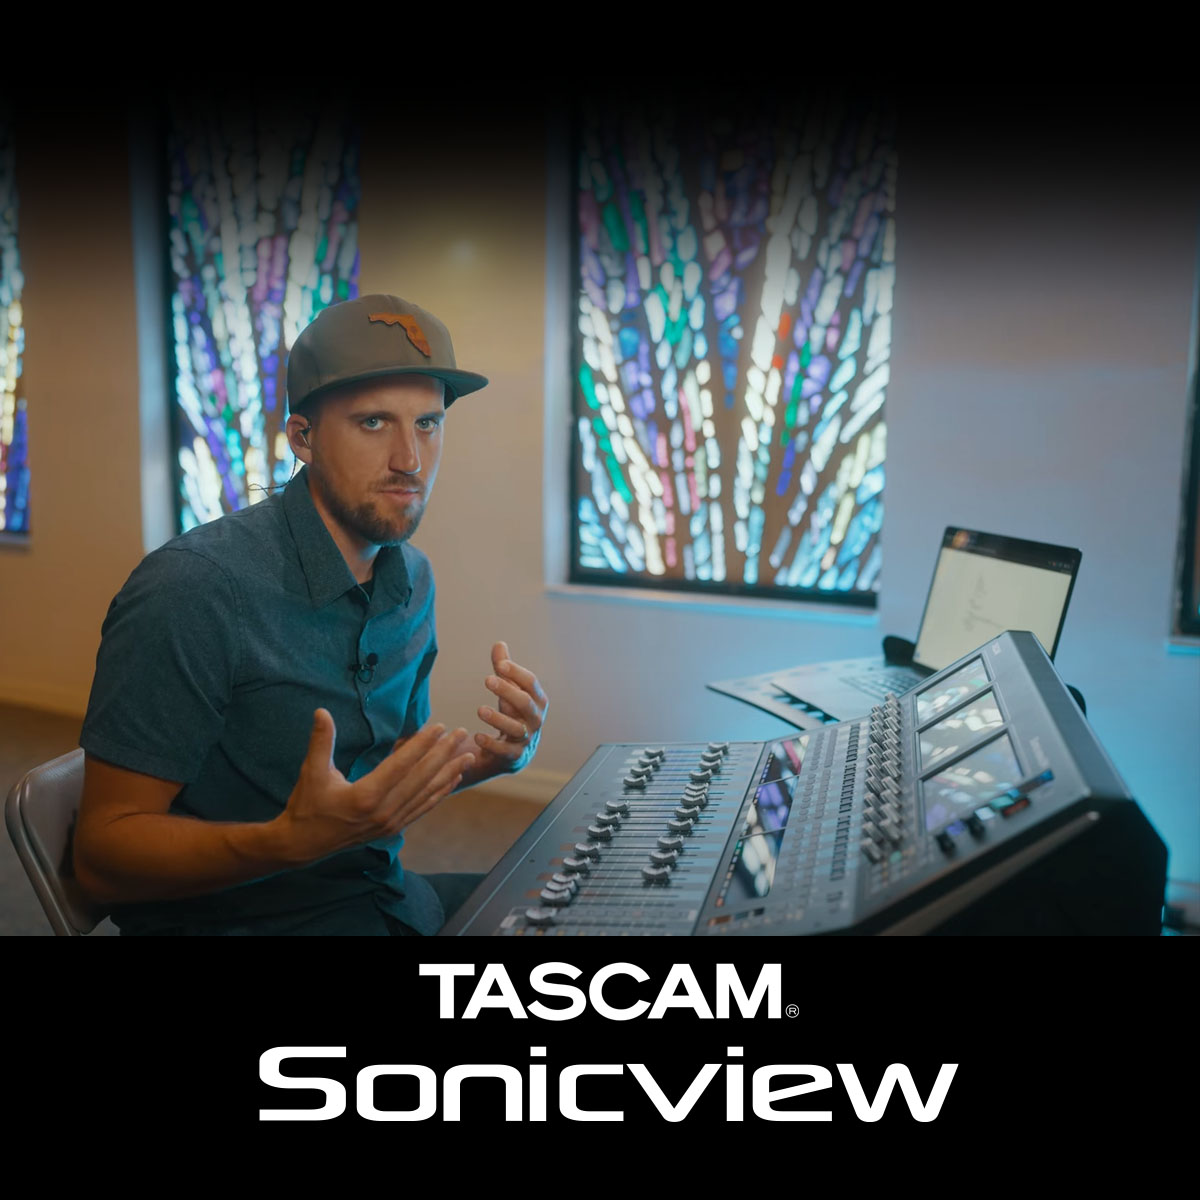 How I Mix Worship with the Tascam Sonicview 24XP Console